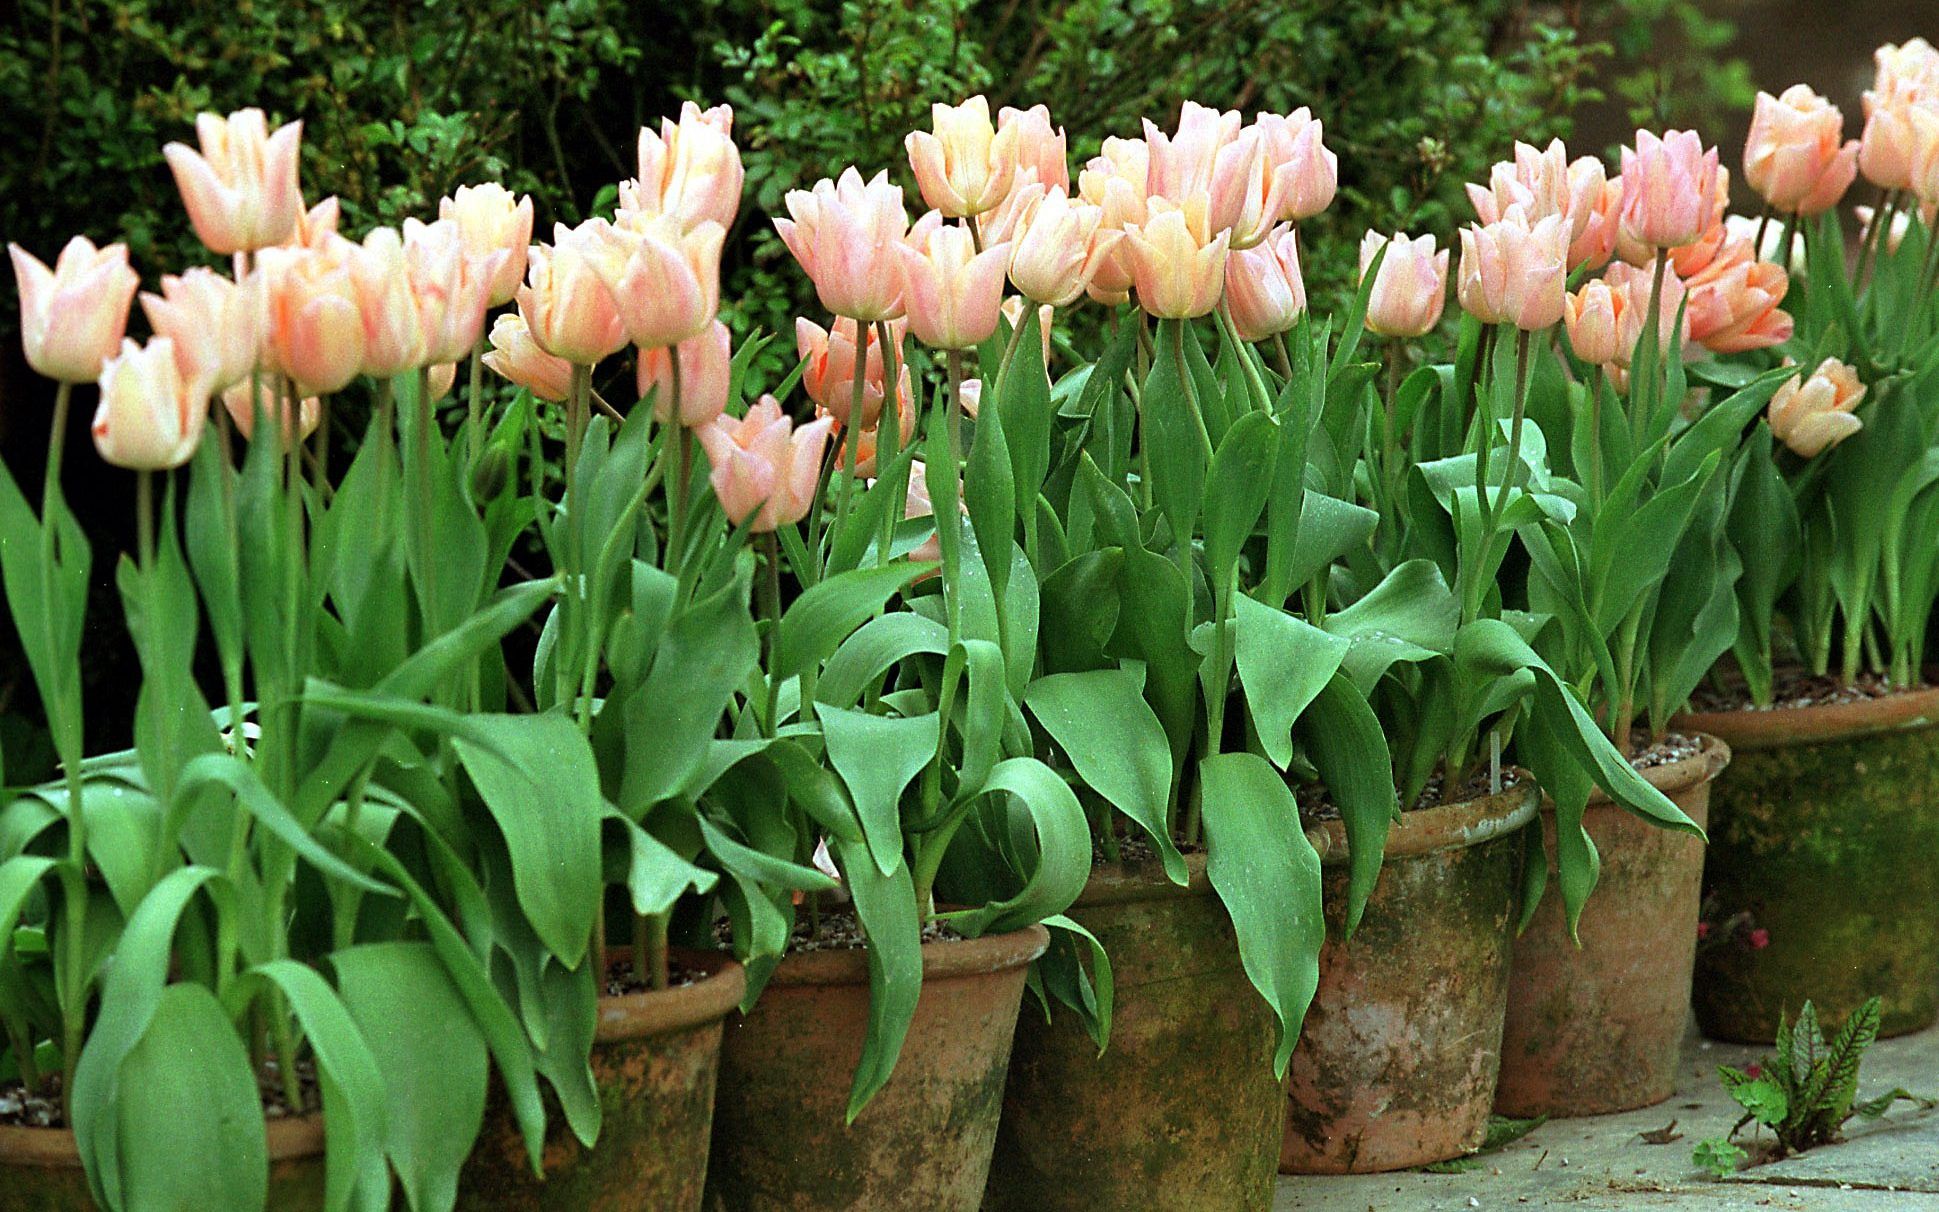 How to grow tulips - a beginner's guide to planting in pots | The Telegraph